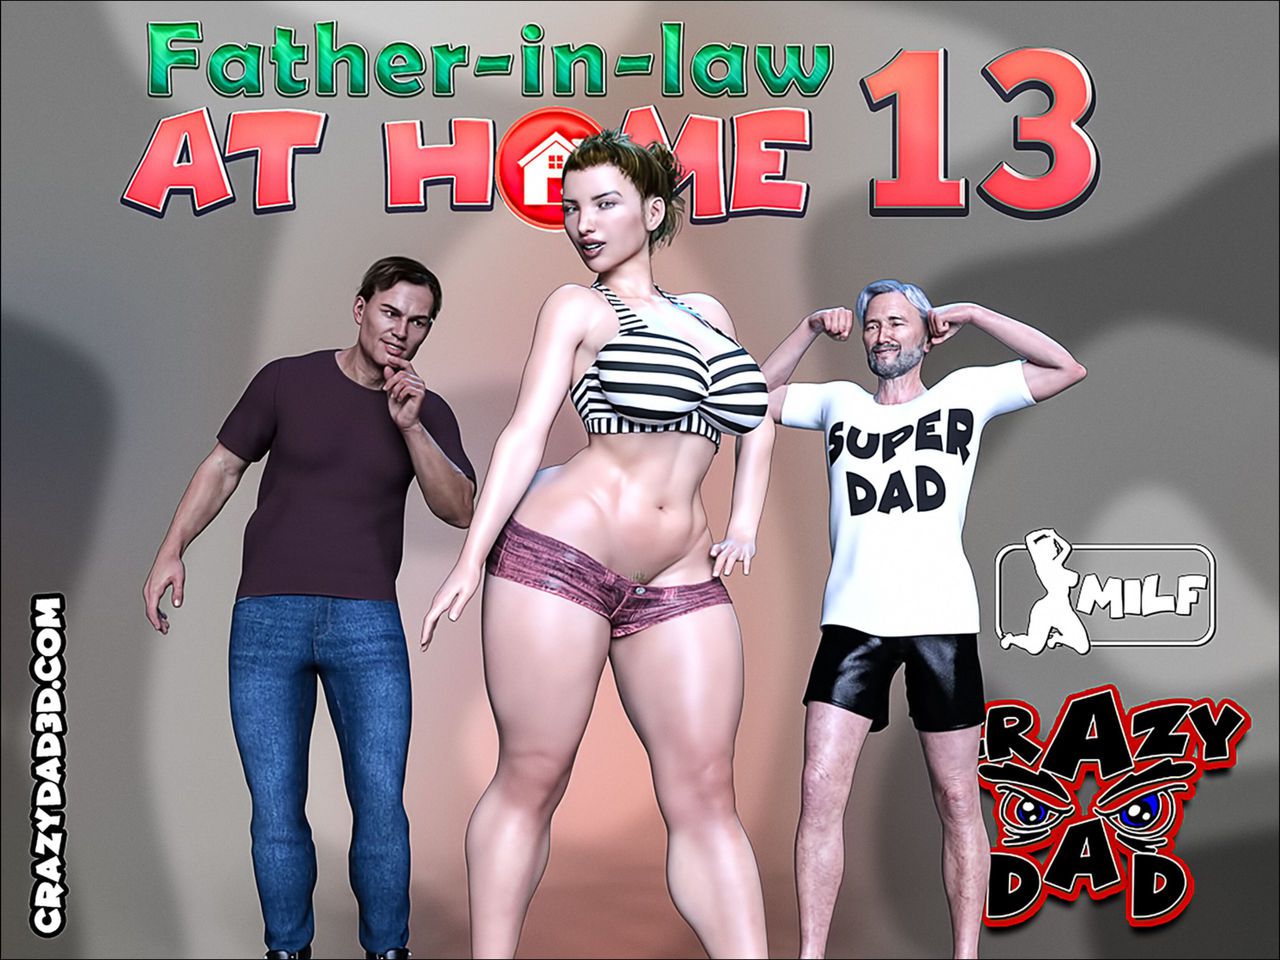 [CrazyDad3D] Father-in-Law at Home 13 (Spanish version) 1